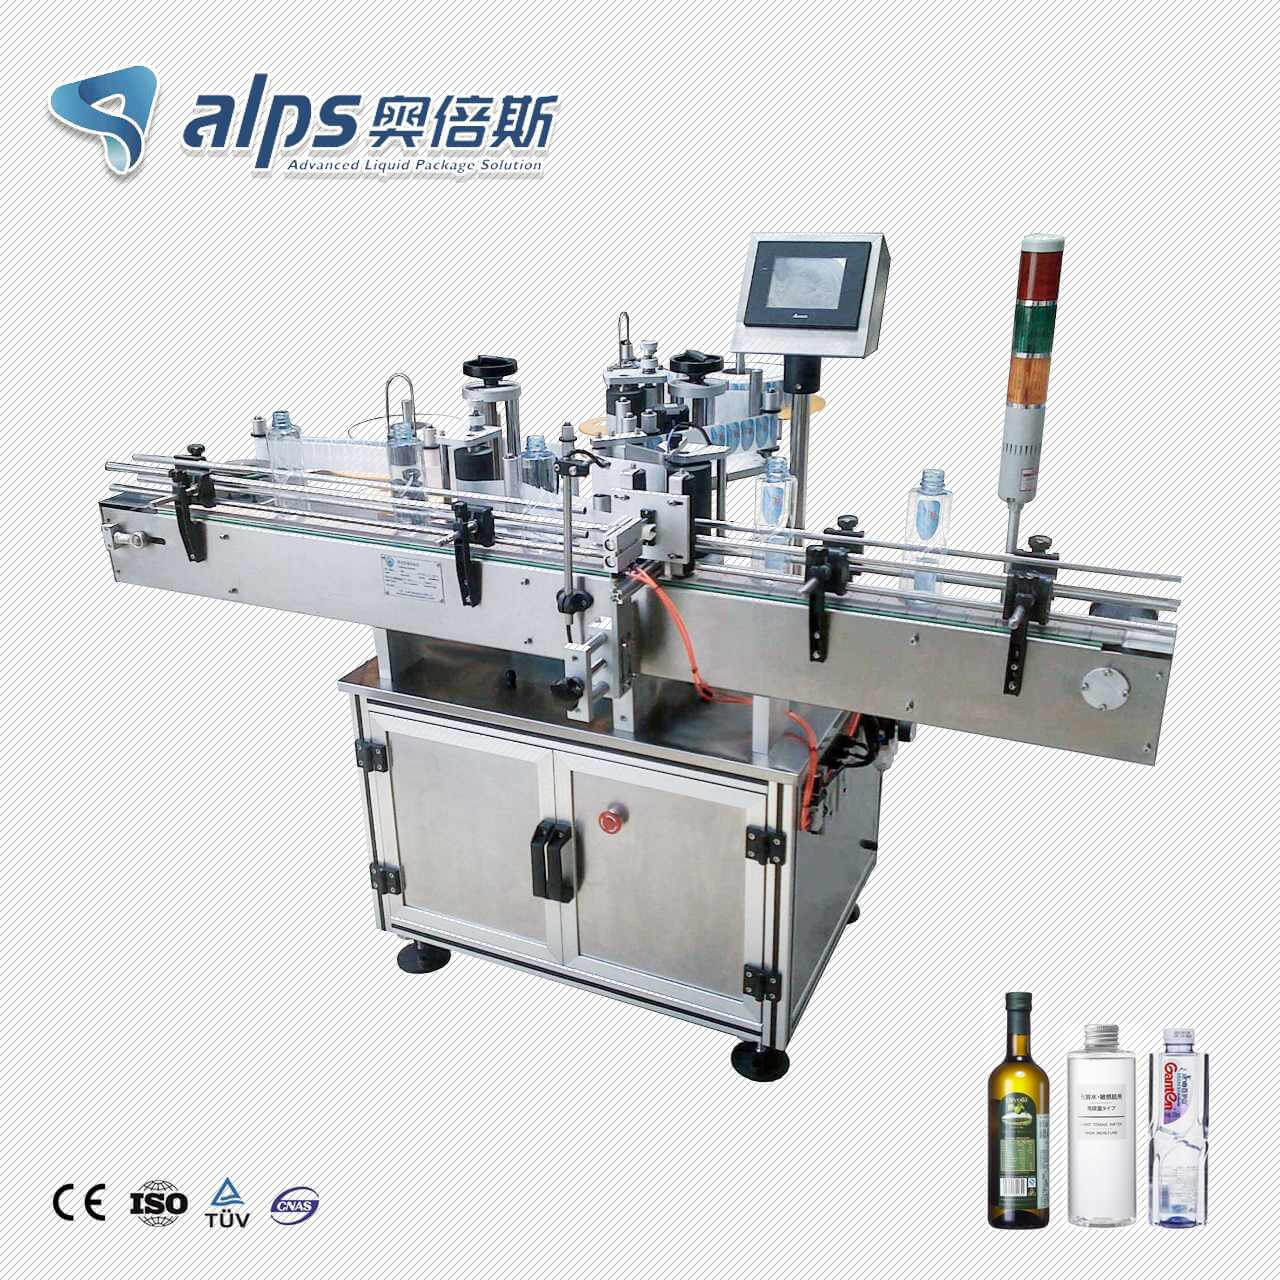 Automatic Bottle Self Adhesive Position Labeling Machine (Model:DWT06)